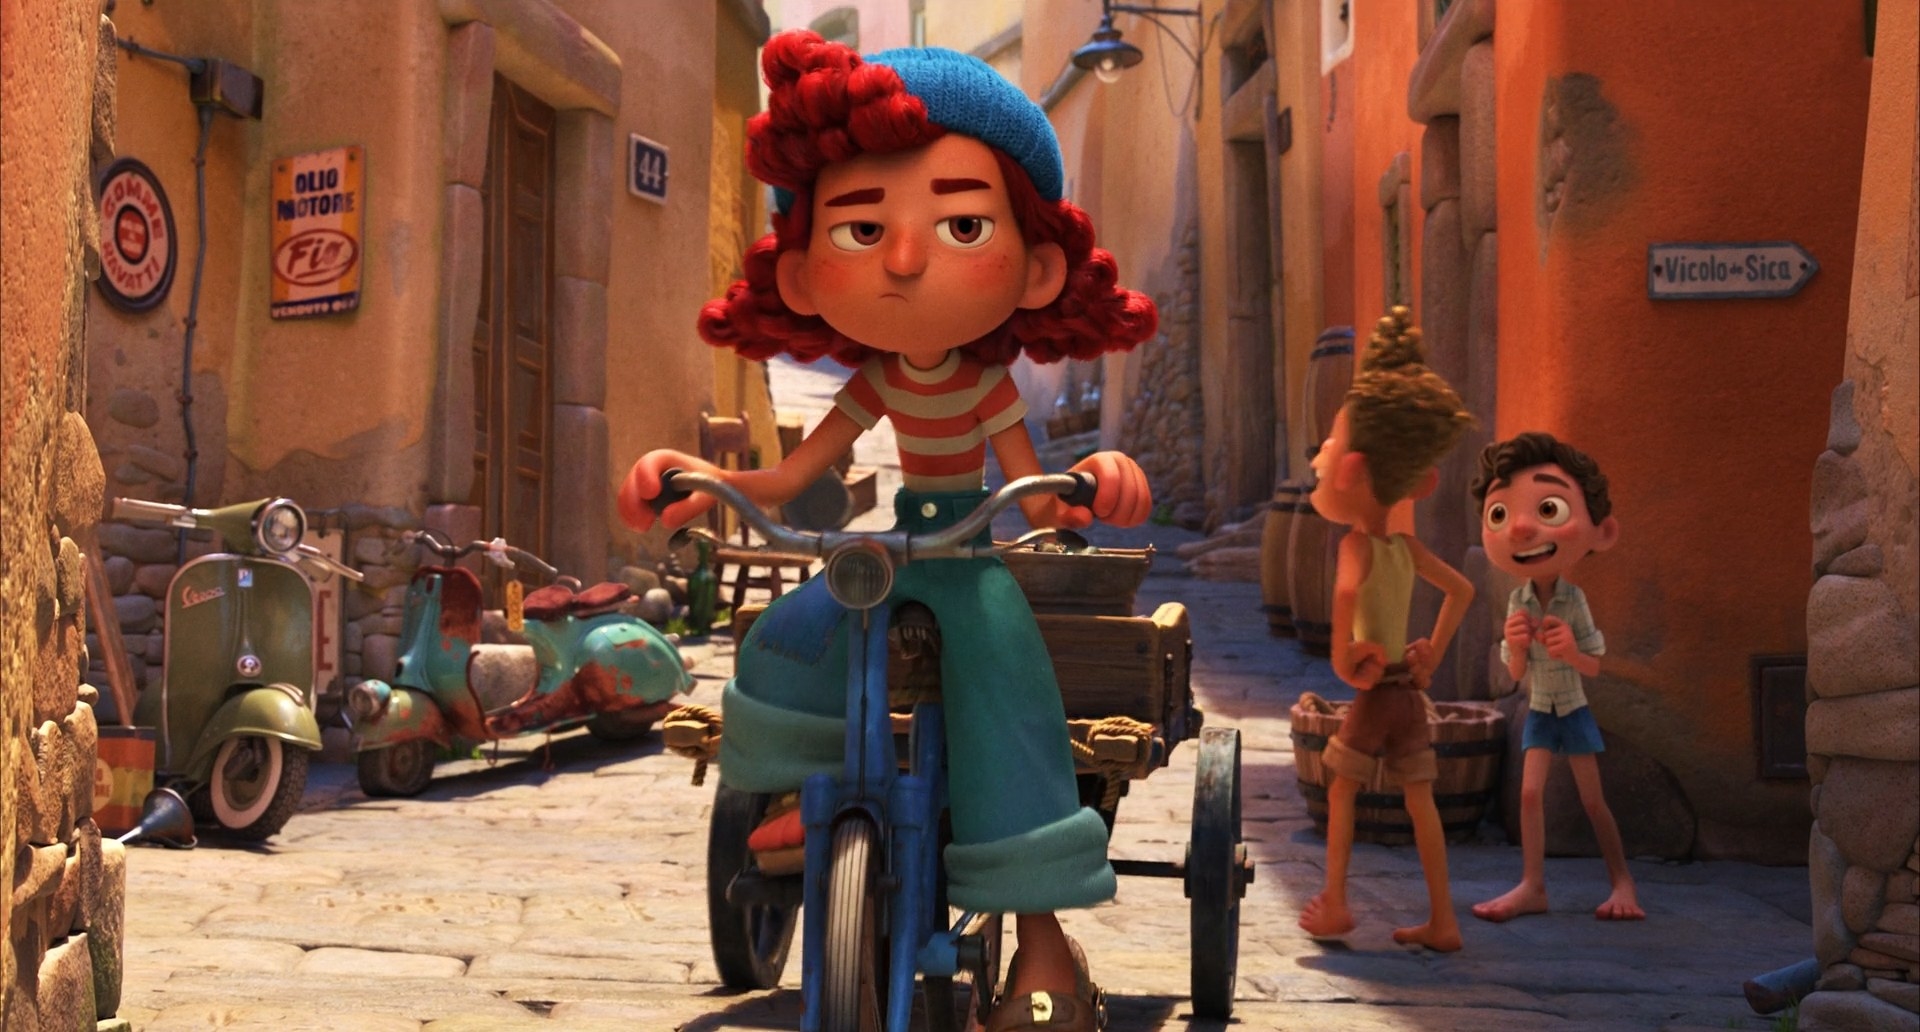 A redhaired girl rides her bicycle pulling a cart attached to the bike while two boys talk in the background